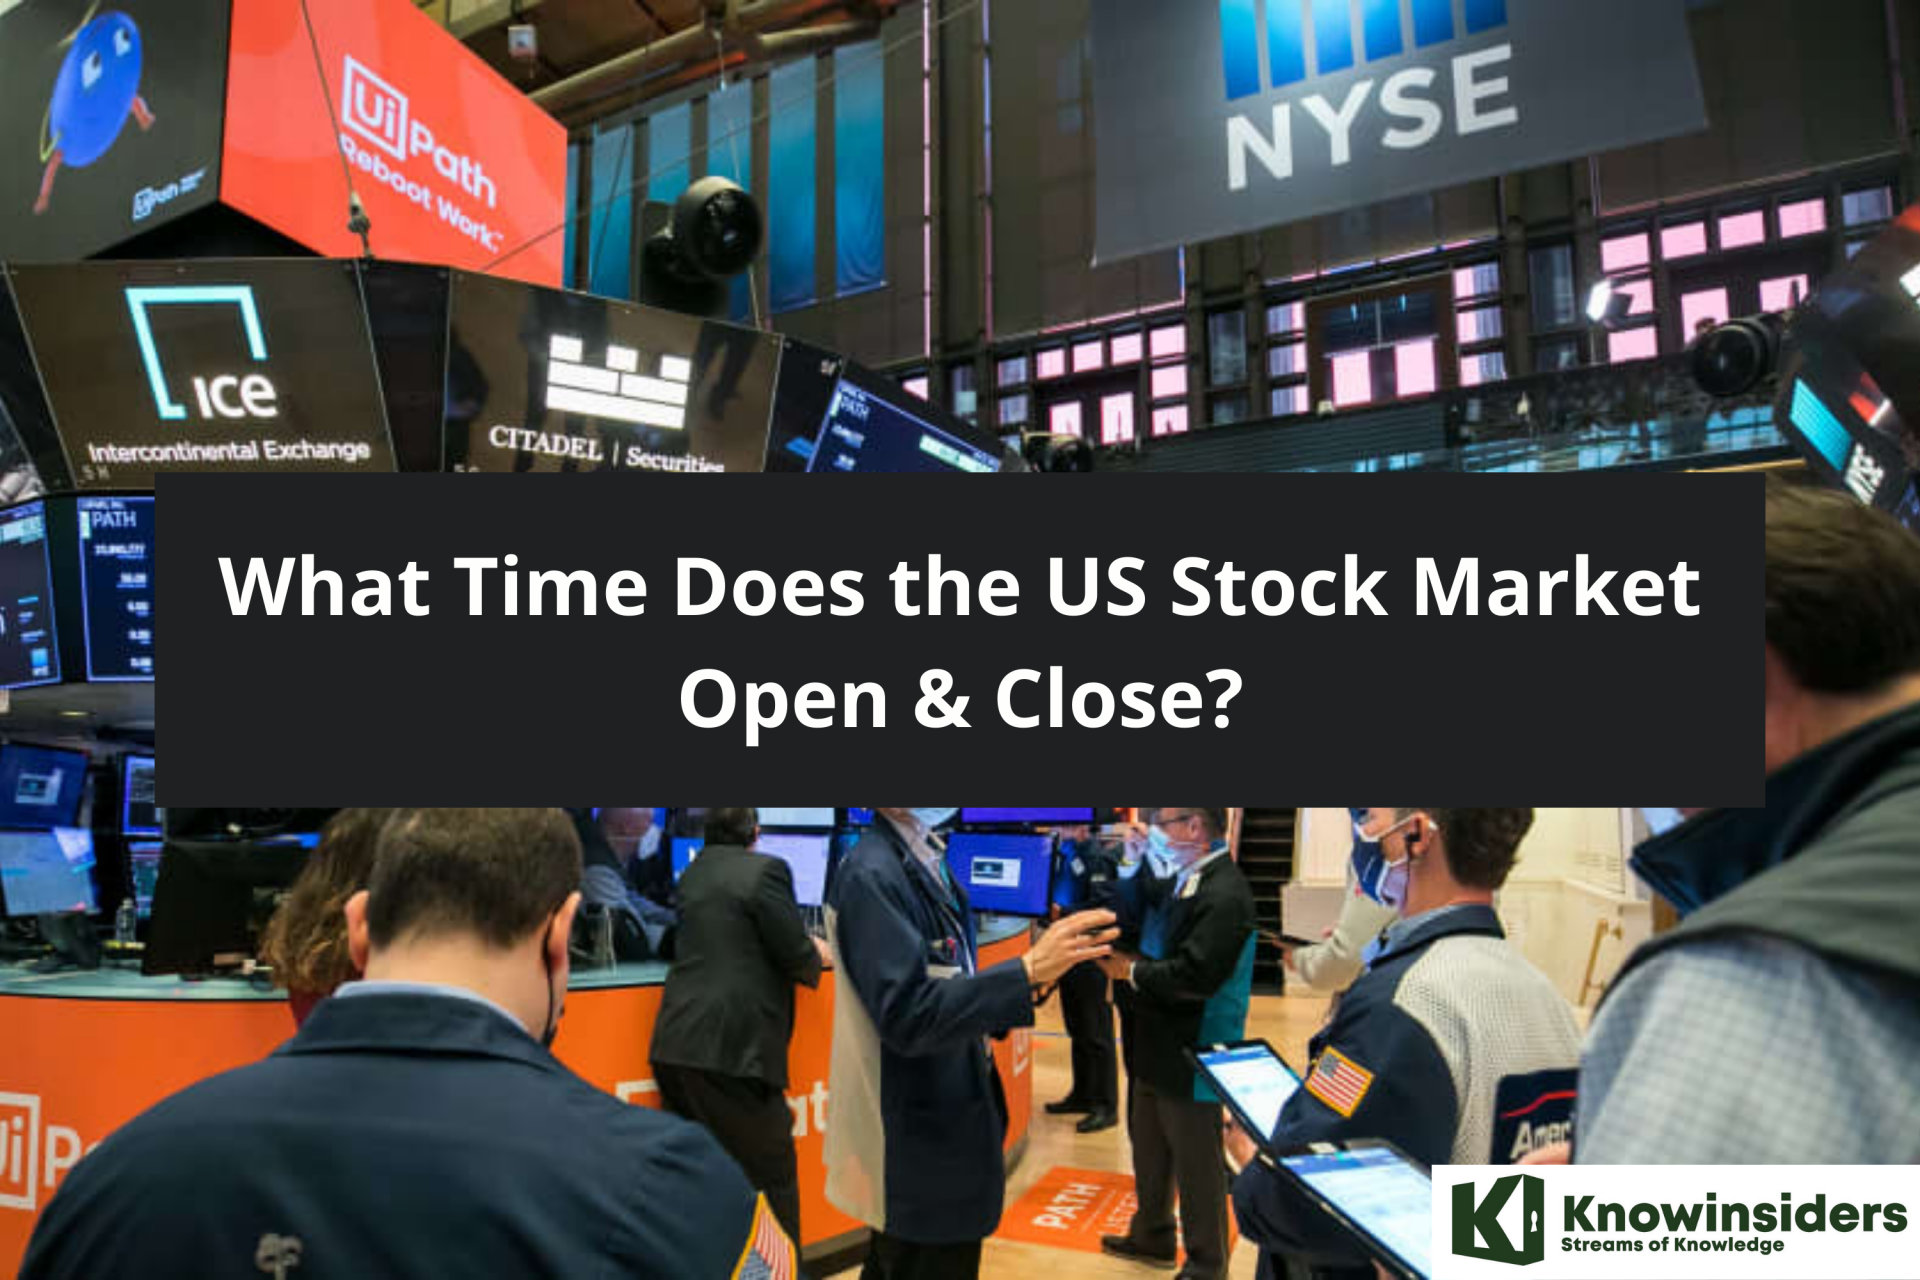 What Time Does the US Stock Market Open & Close?